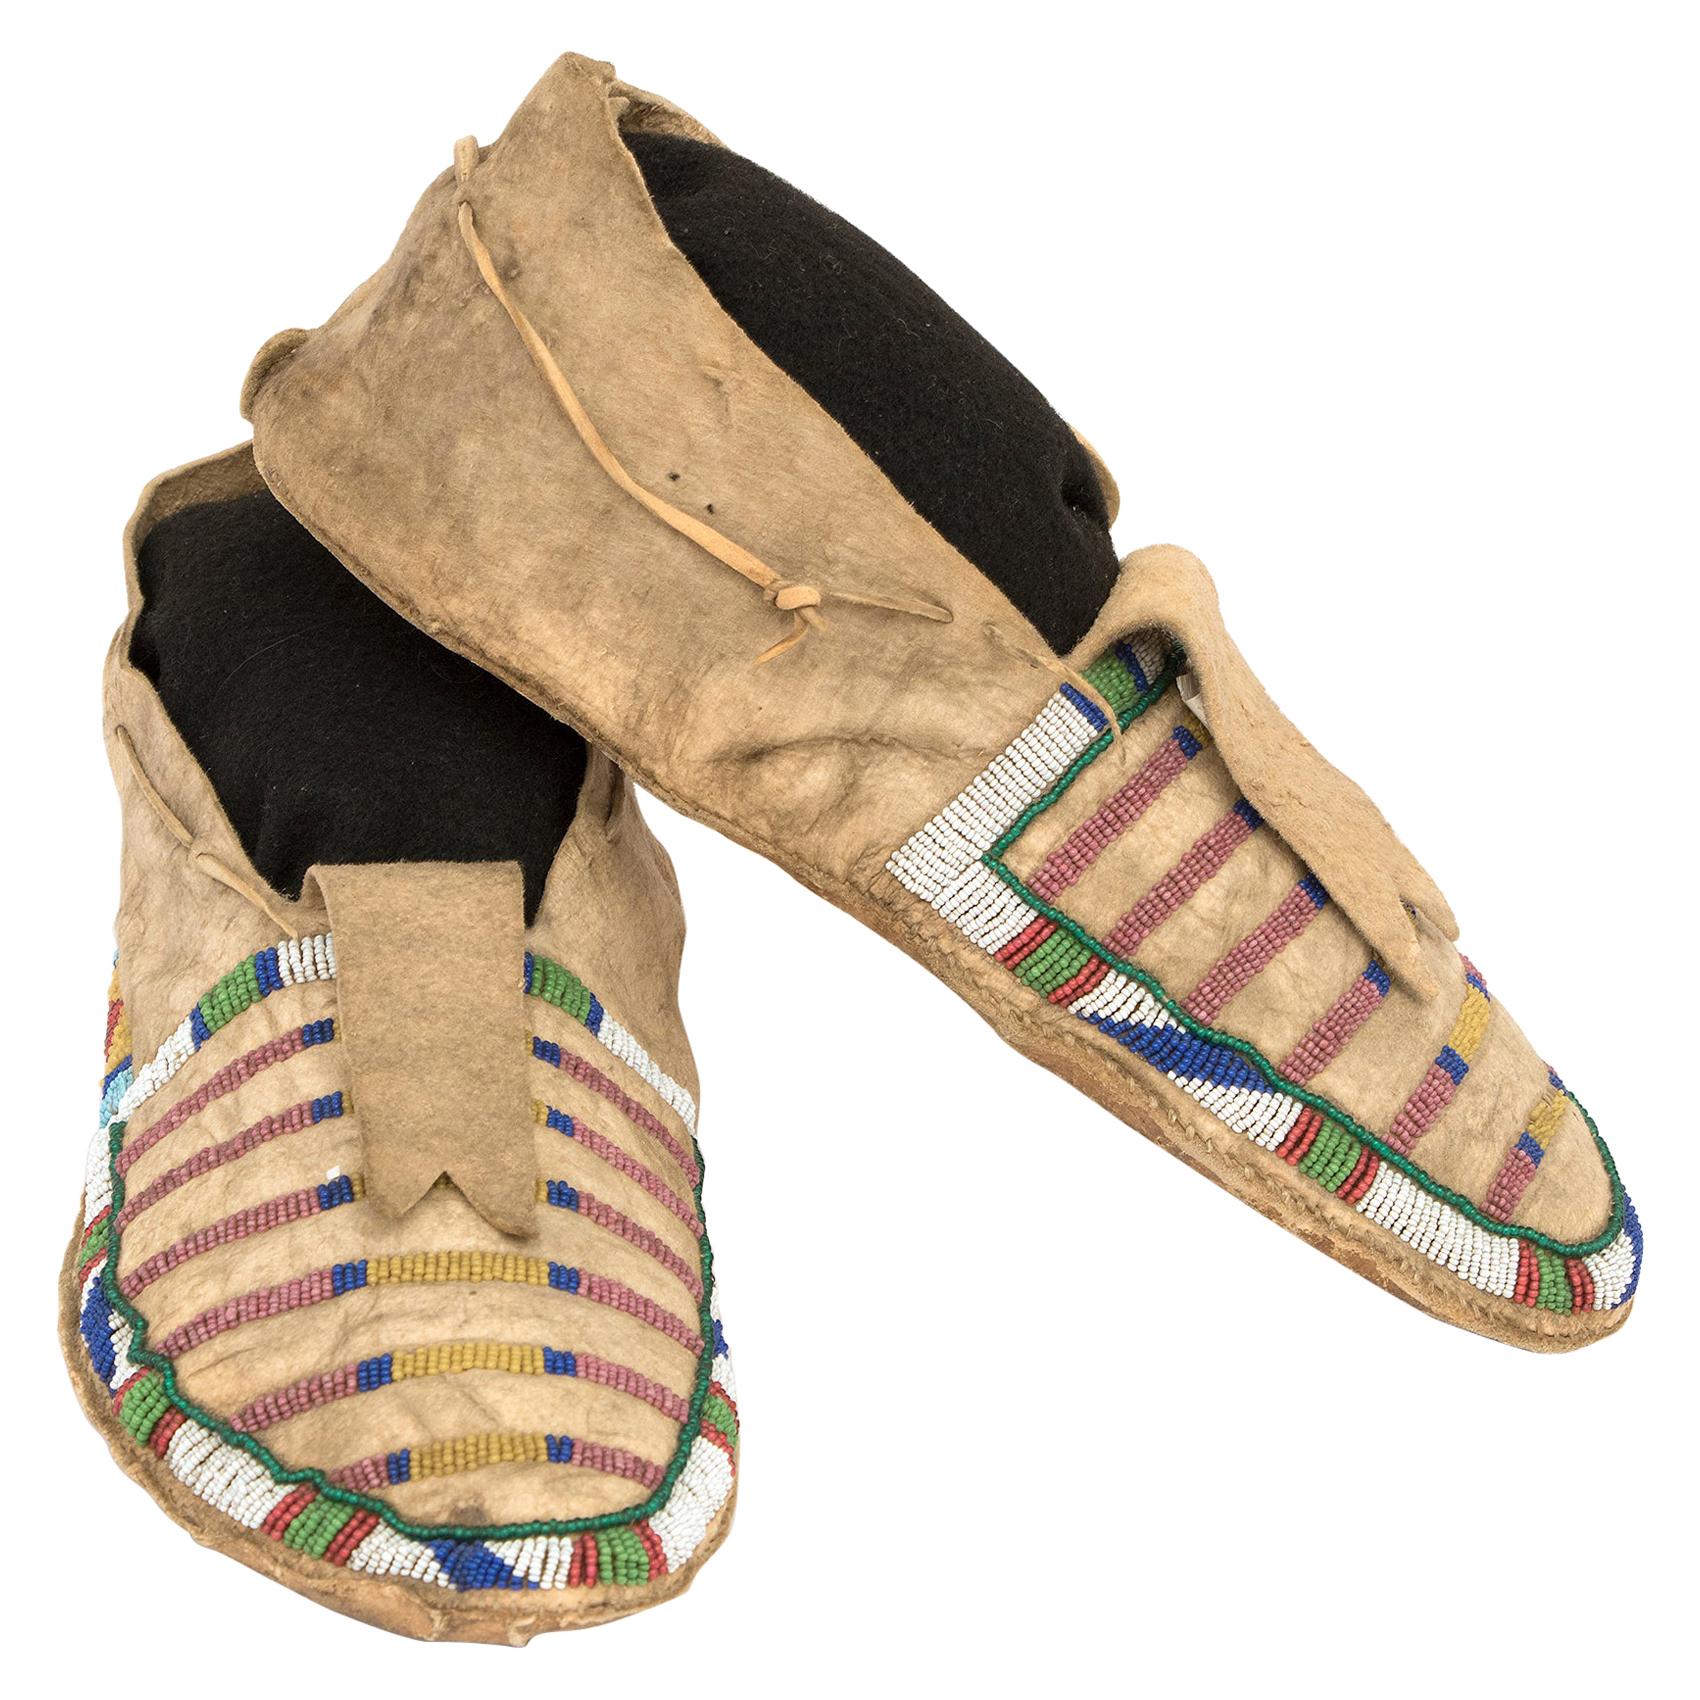 Antique Native American Beaded Moccasins, Crow 'Plains Indian', circa 1870